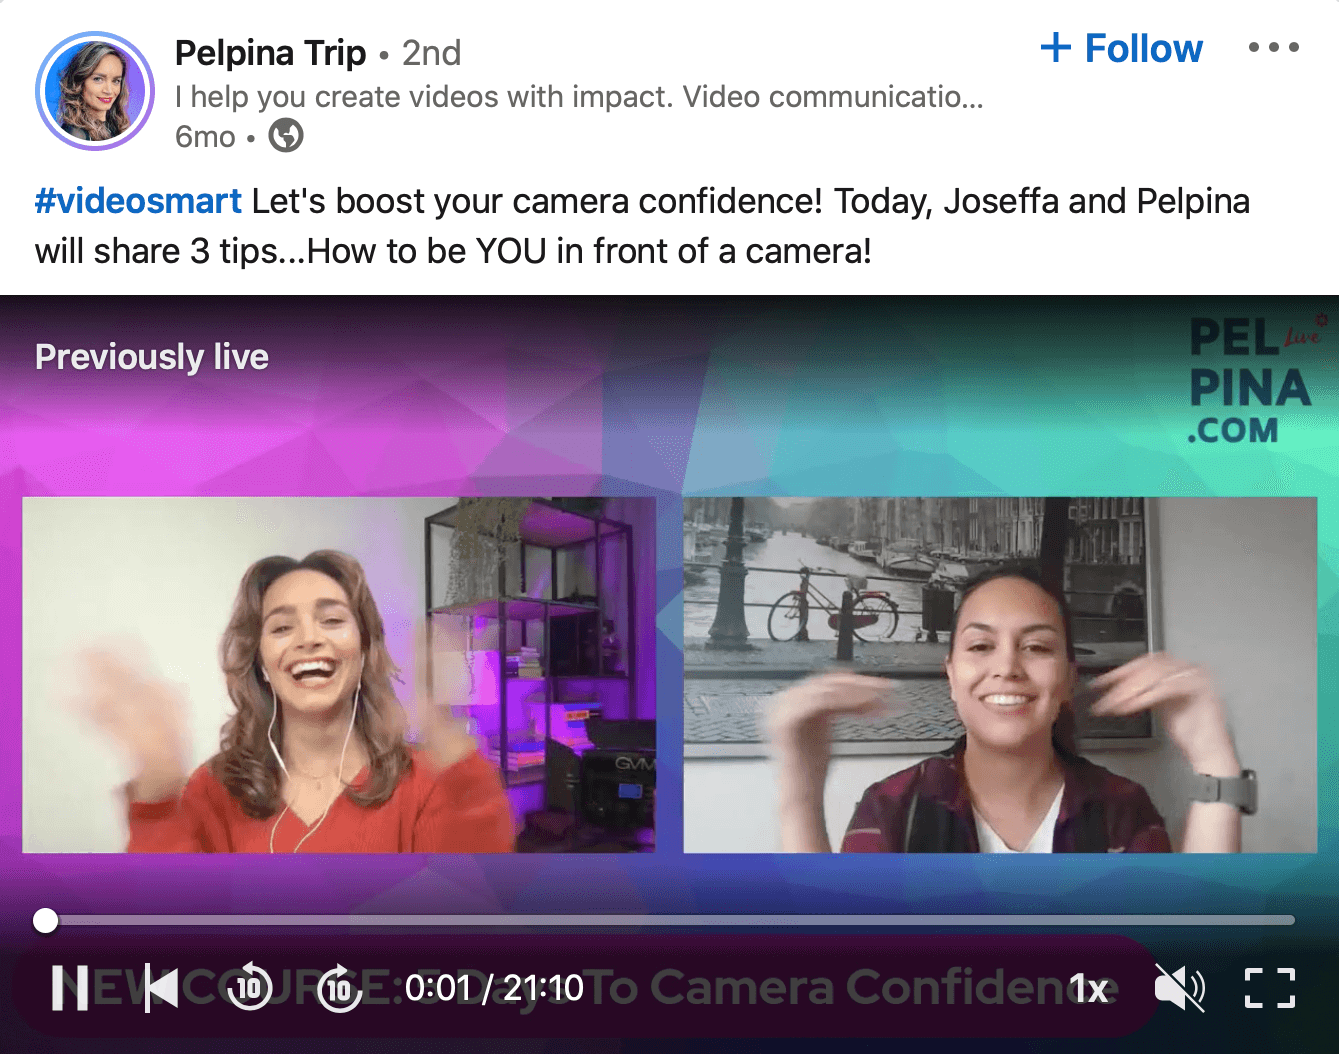 image of LinkedIn video from Pelpina Trip